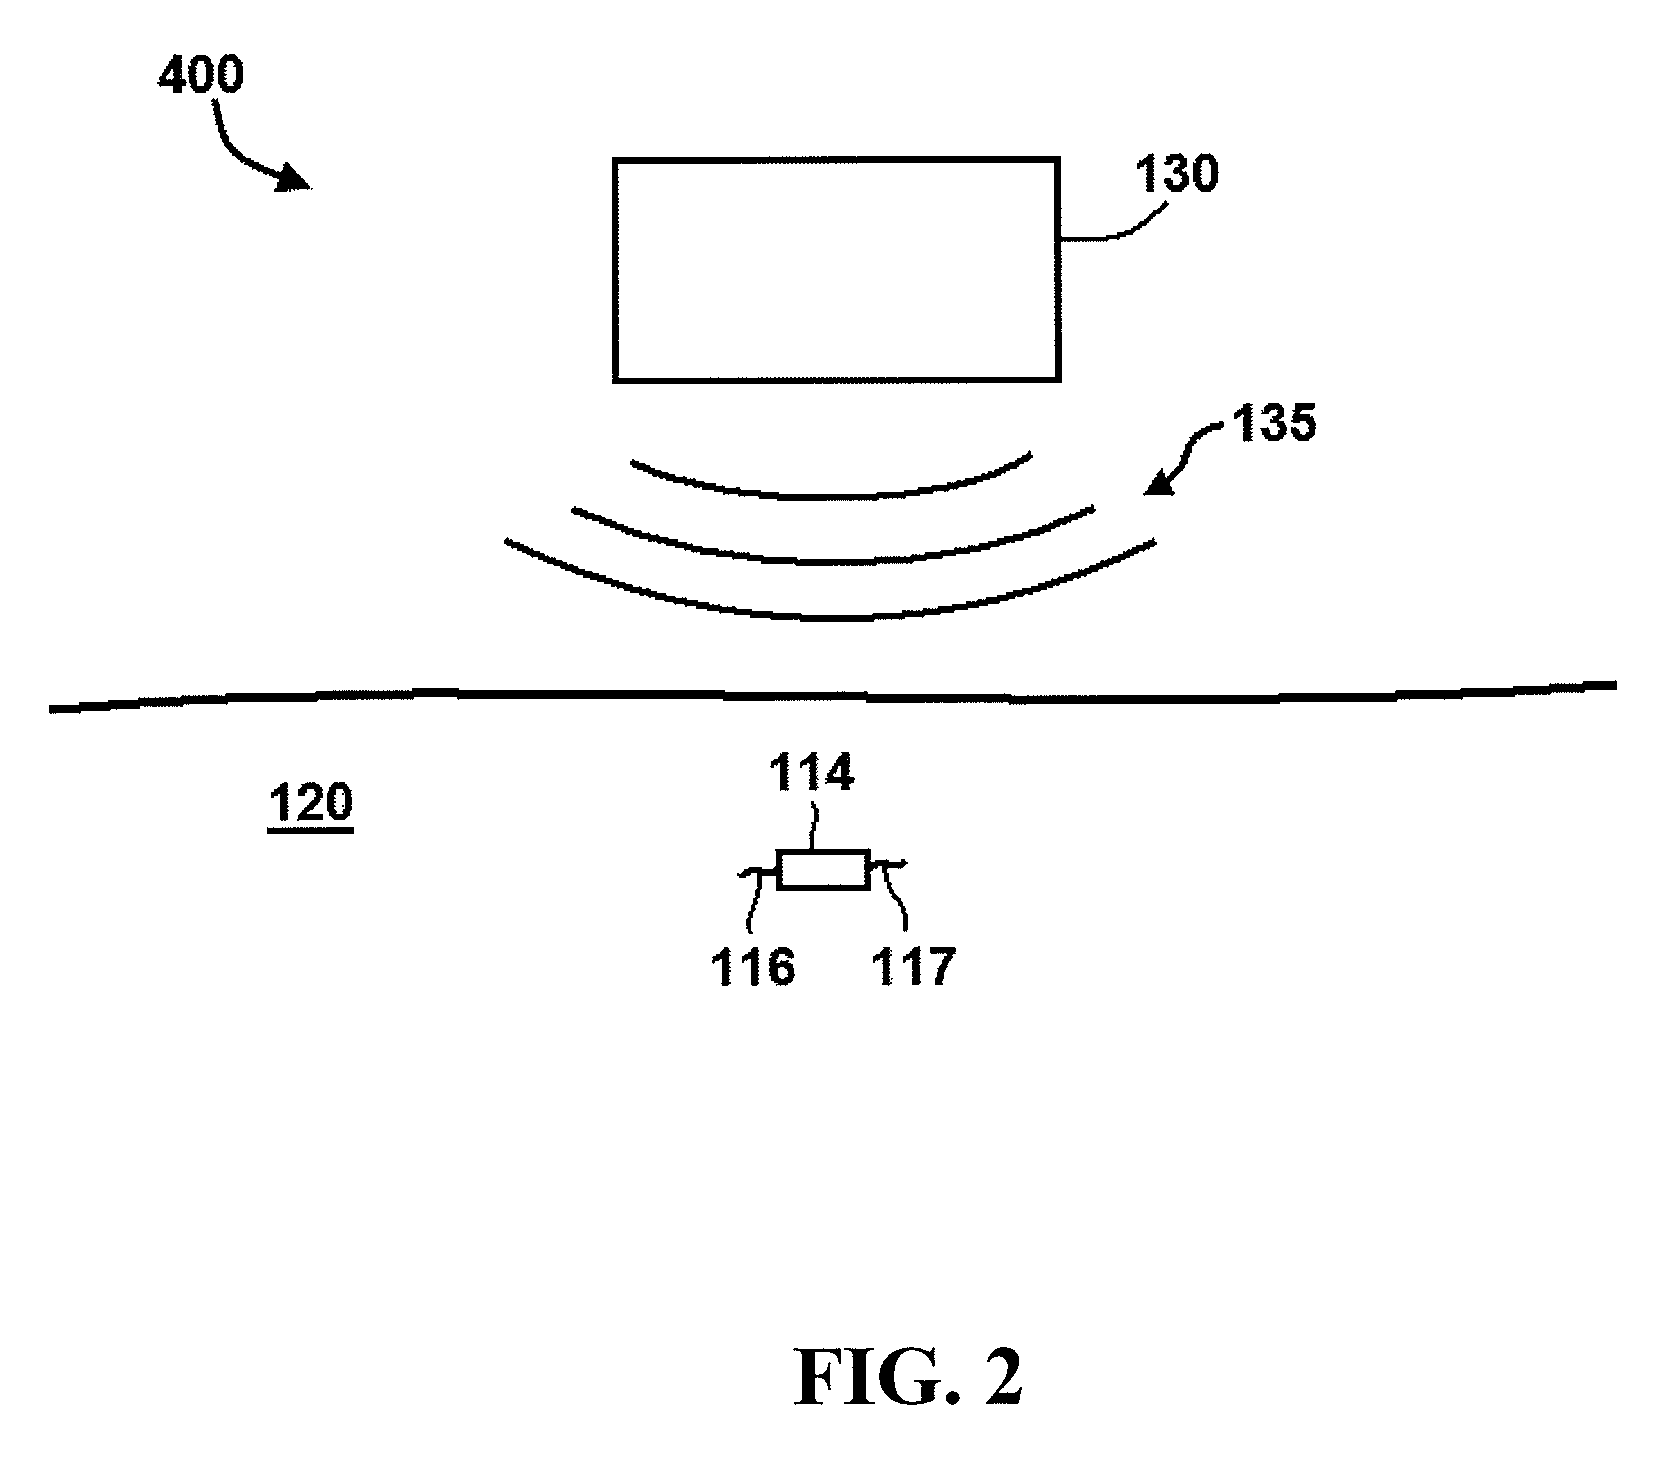 Systems, and methods for neurostimulation and neurotelemetry using semiconductor diode systems